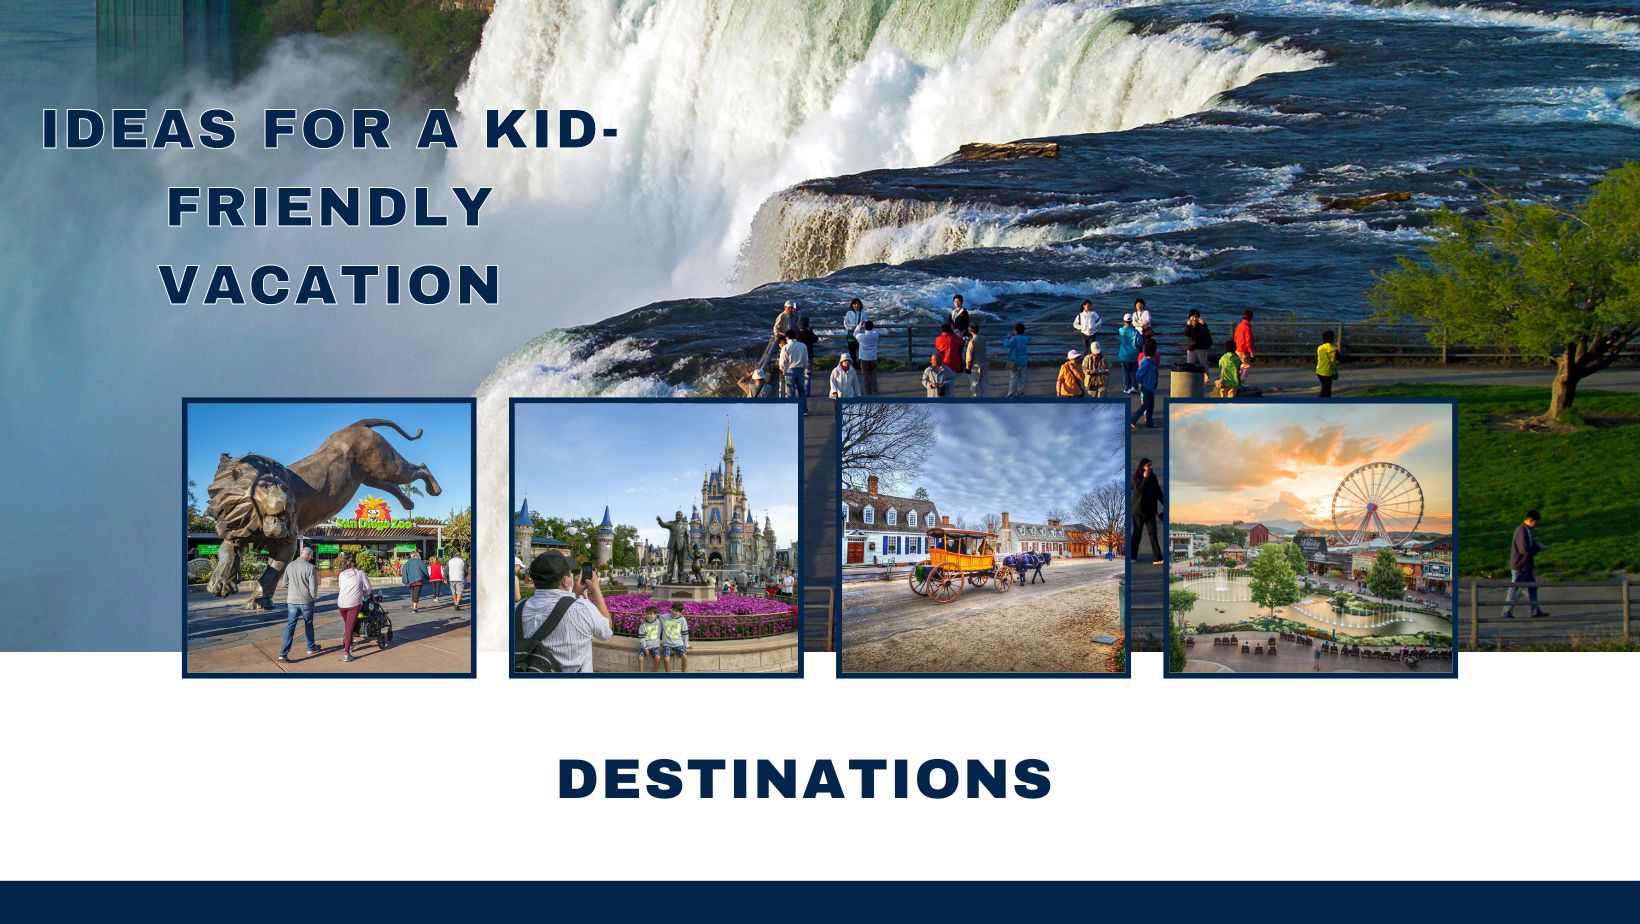 Top Family-Friendly Spring Break Destinations: Ideas for a Kid-Friendly Vacation